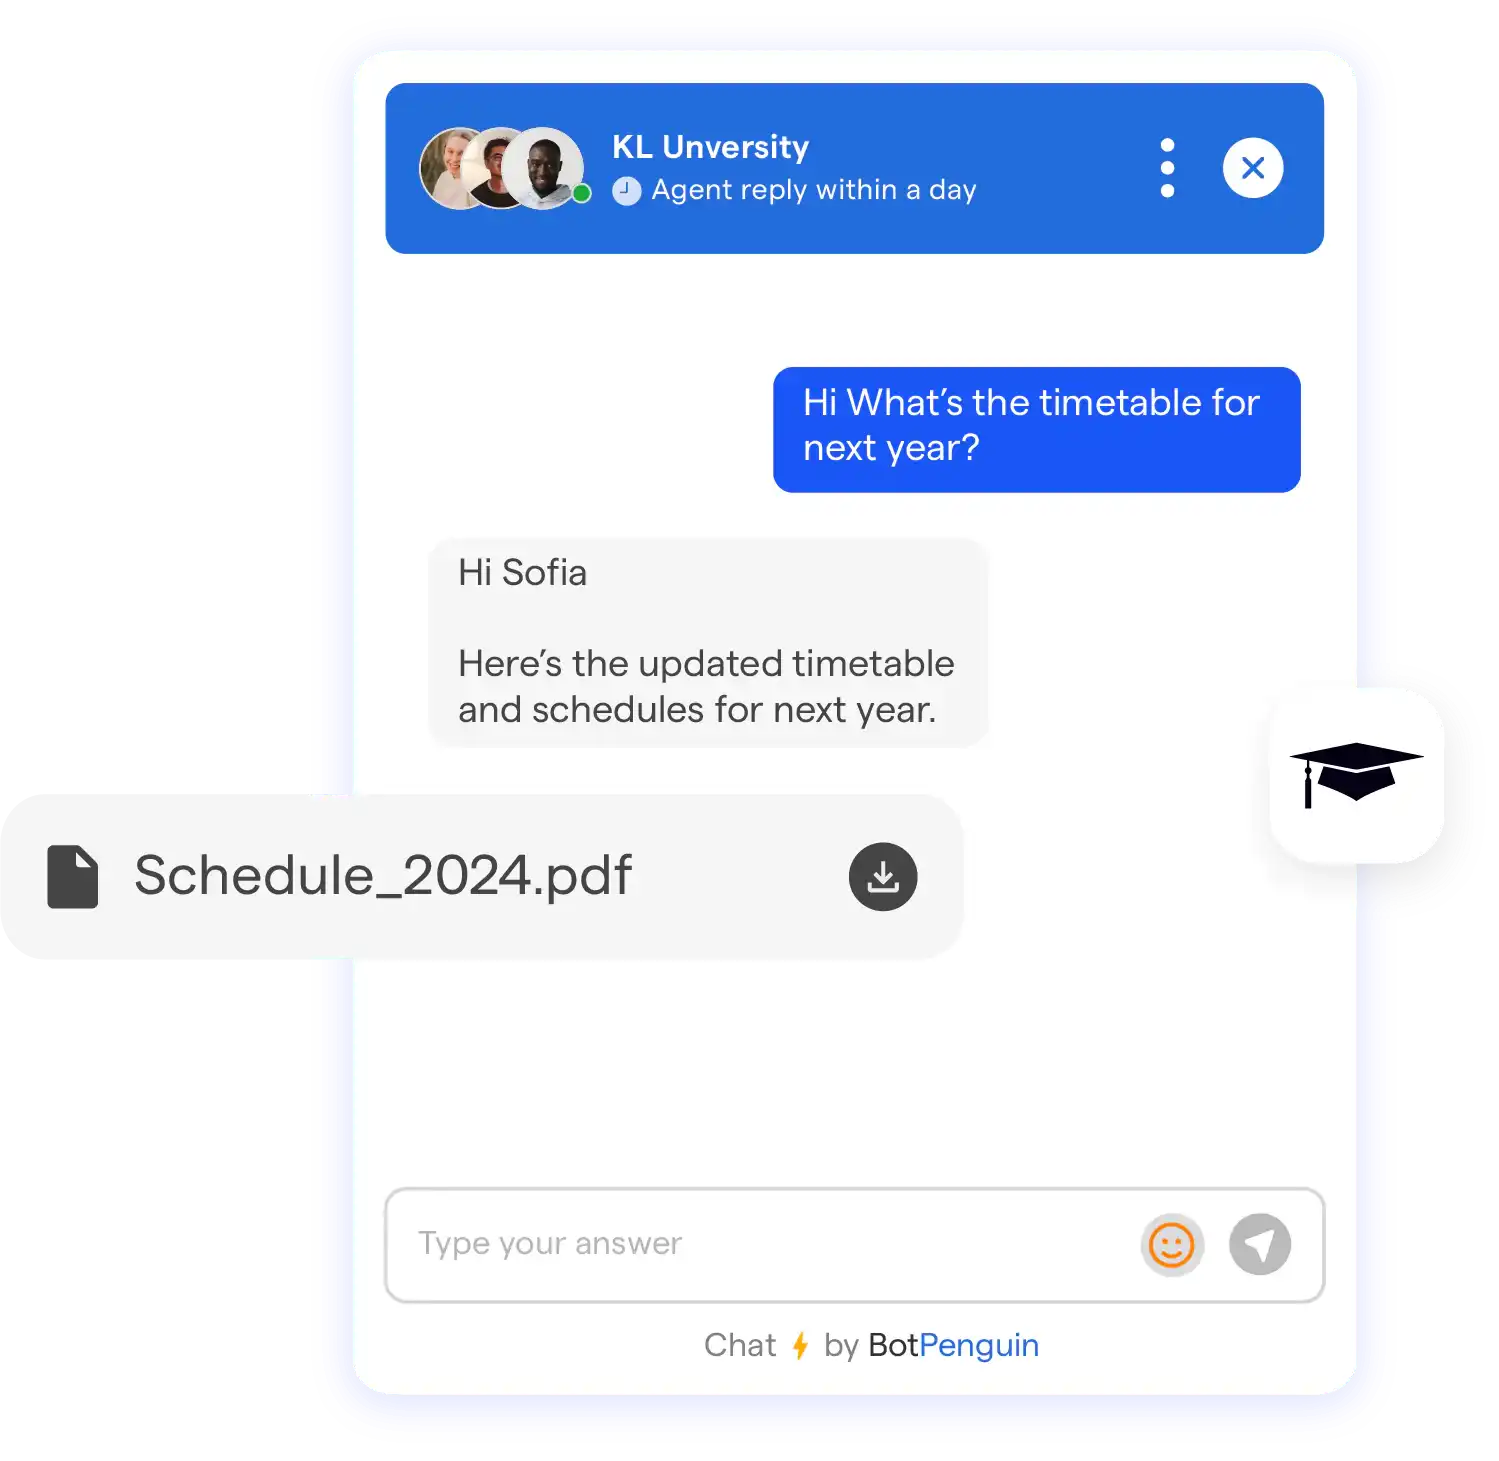 Future of Chatbots in Education